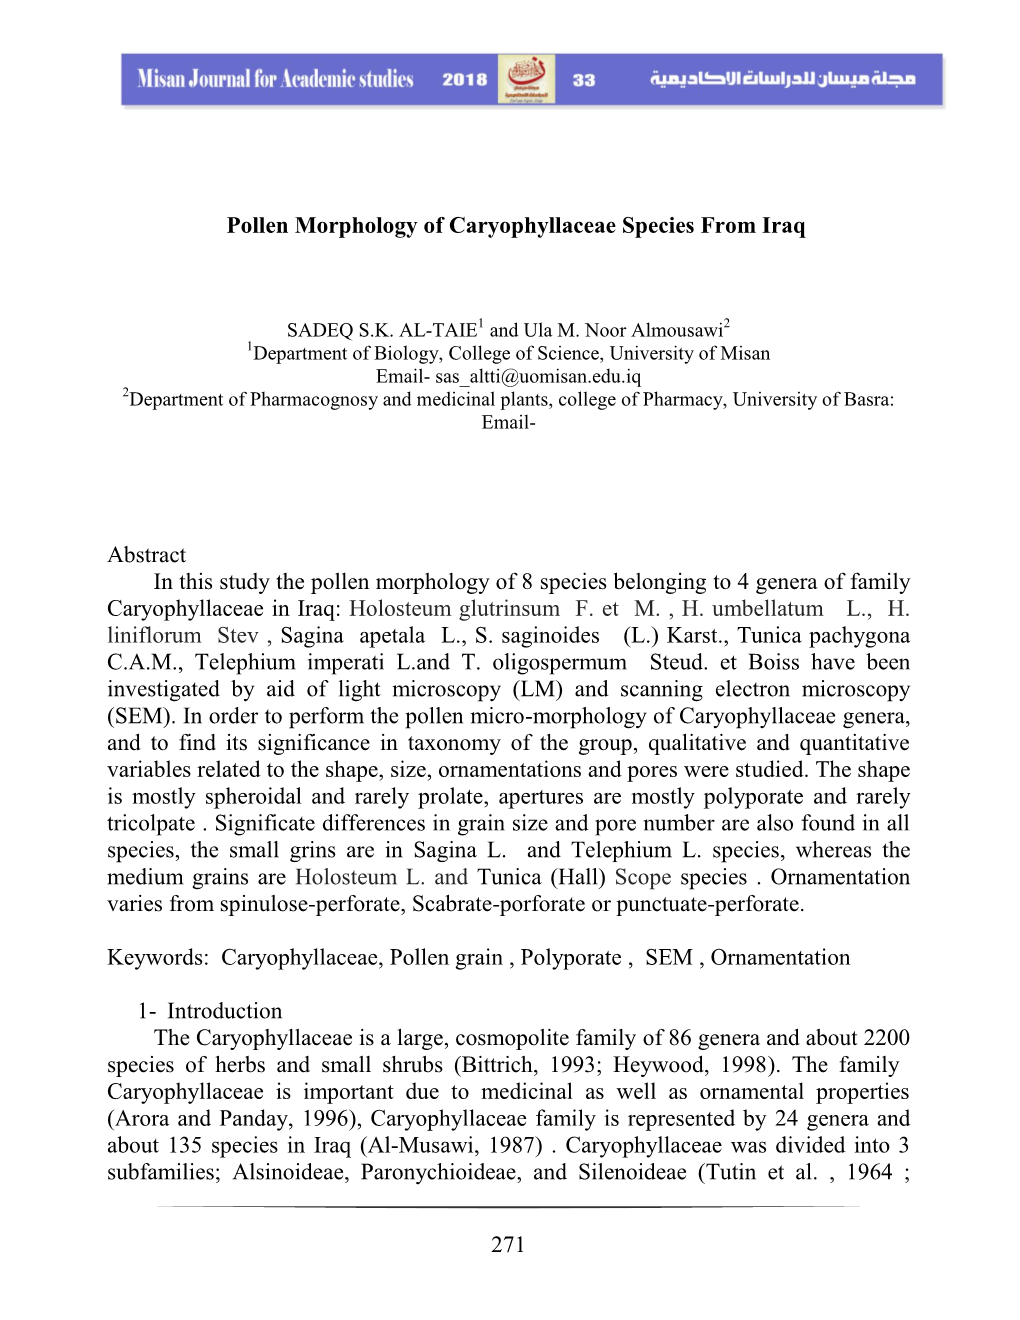 Pollen Morphology of Caryophyllaceae Species from Iraq